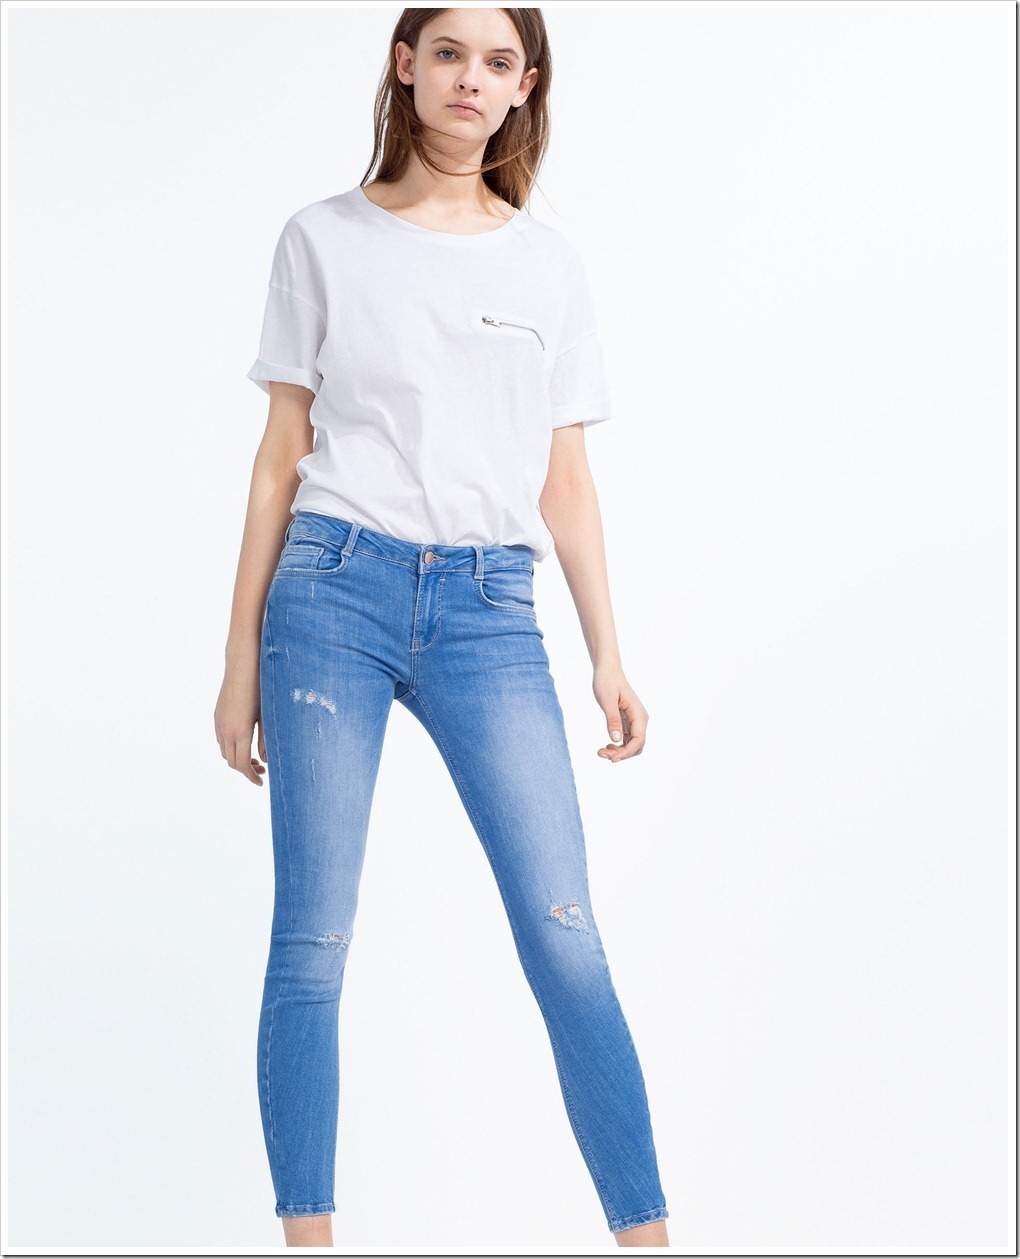 zara jeans new collection